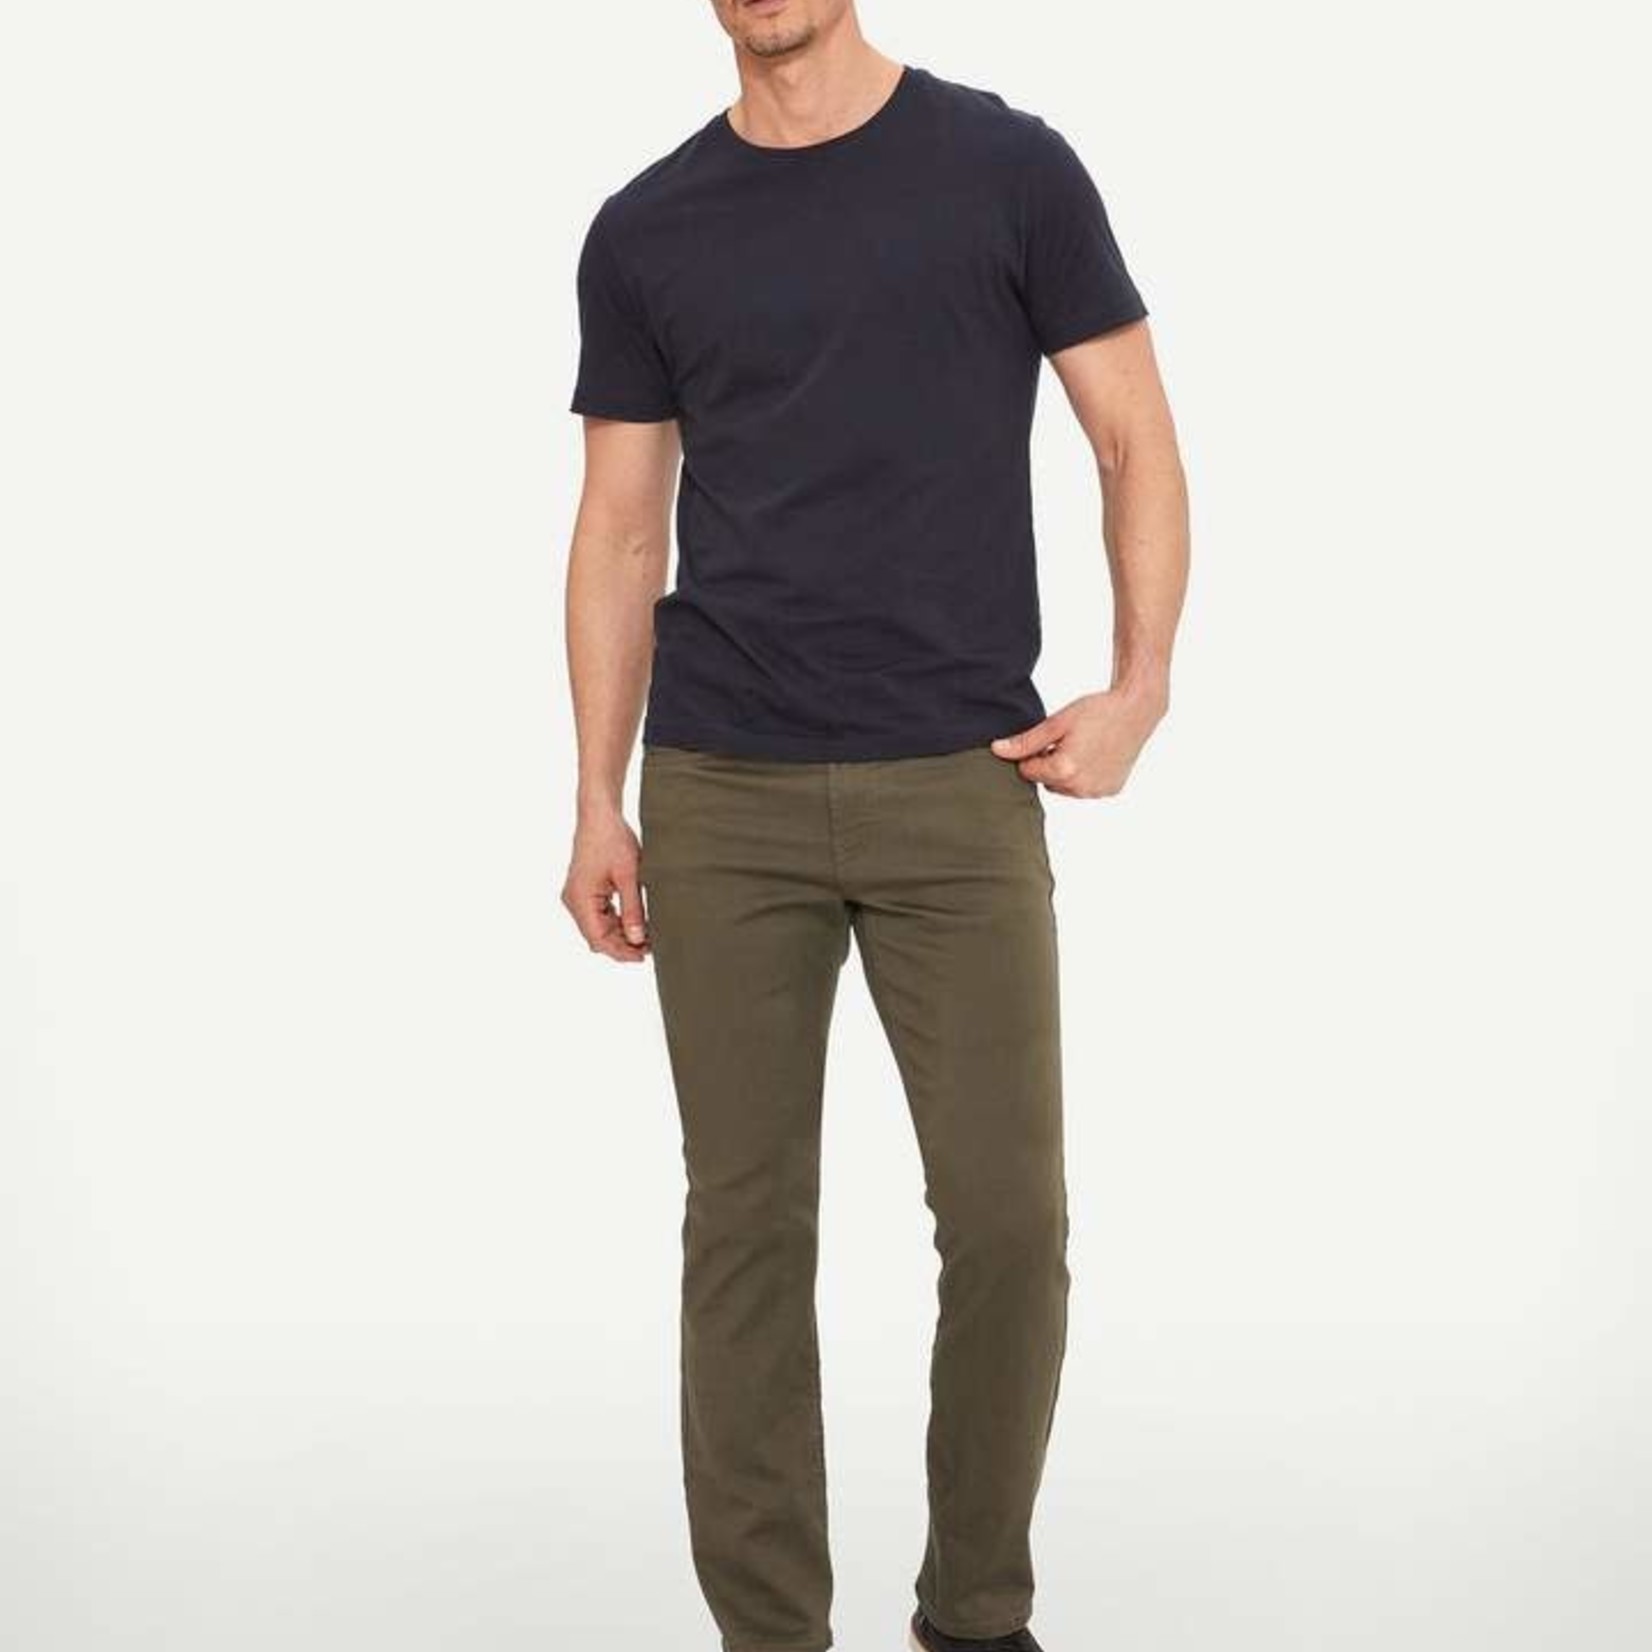 Lois Jeans Canada The "Brad Slim 6240-54" by Lois Jeans